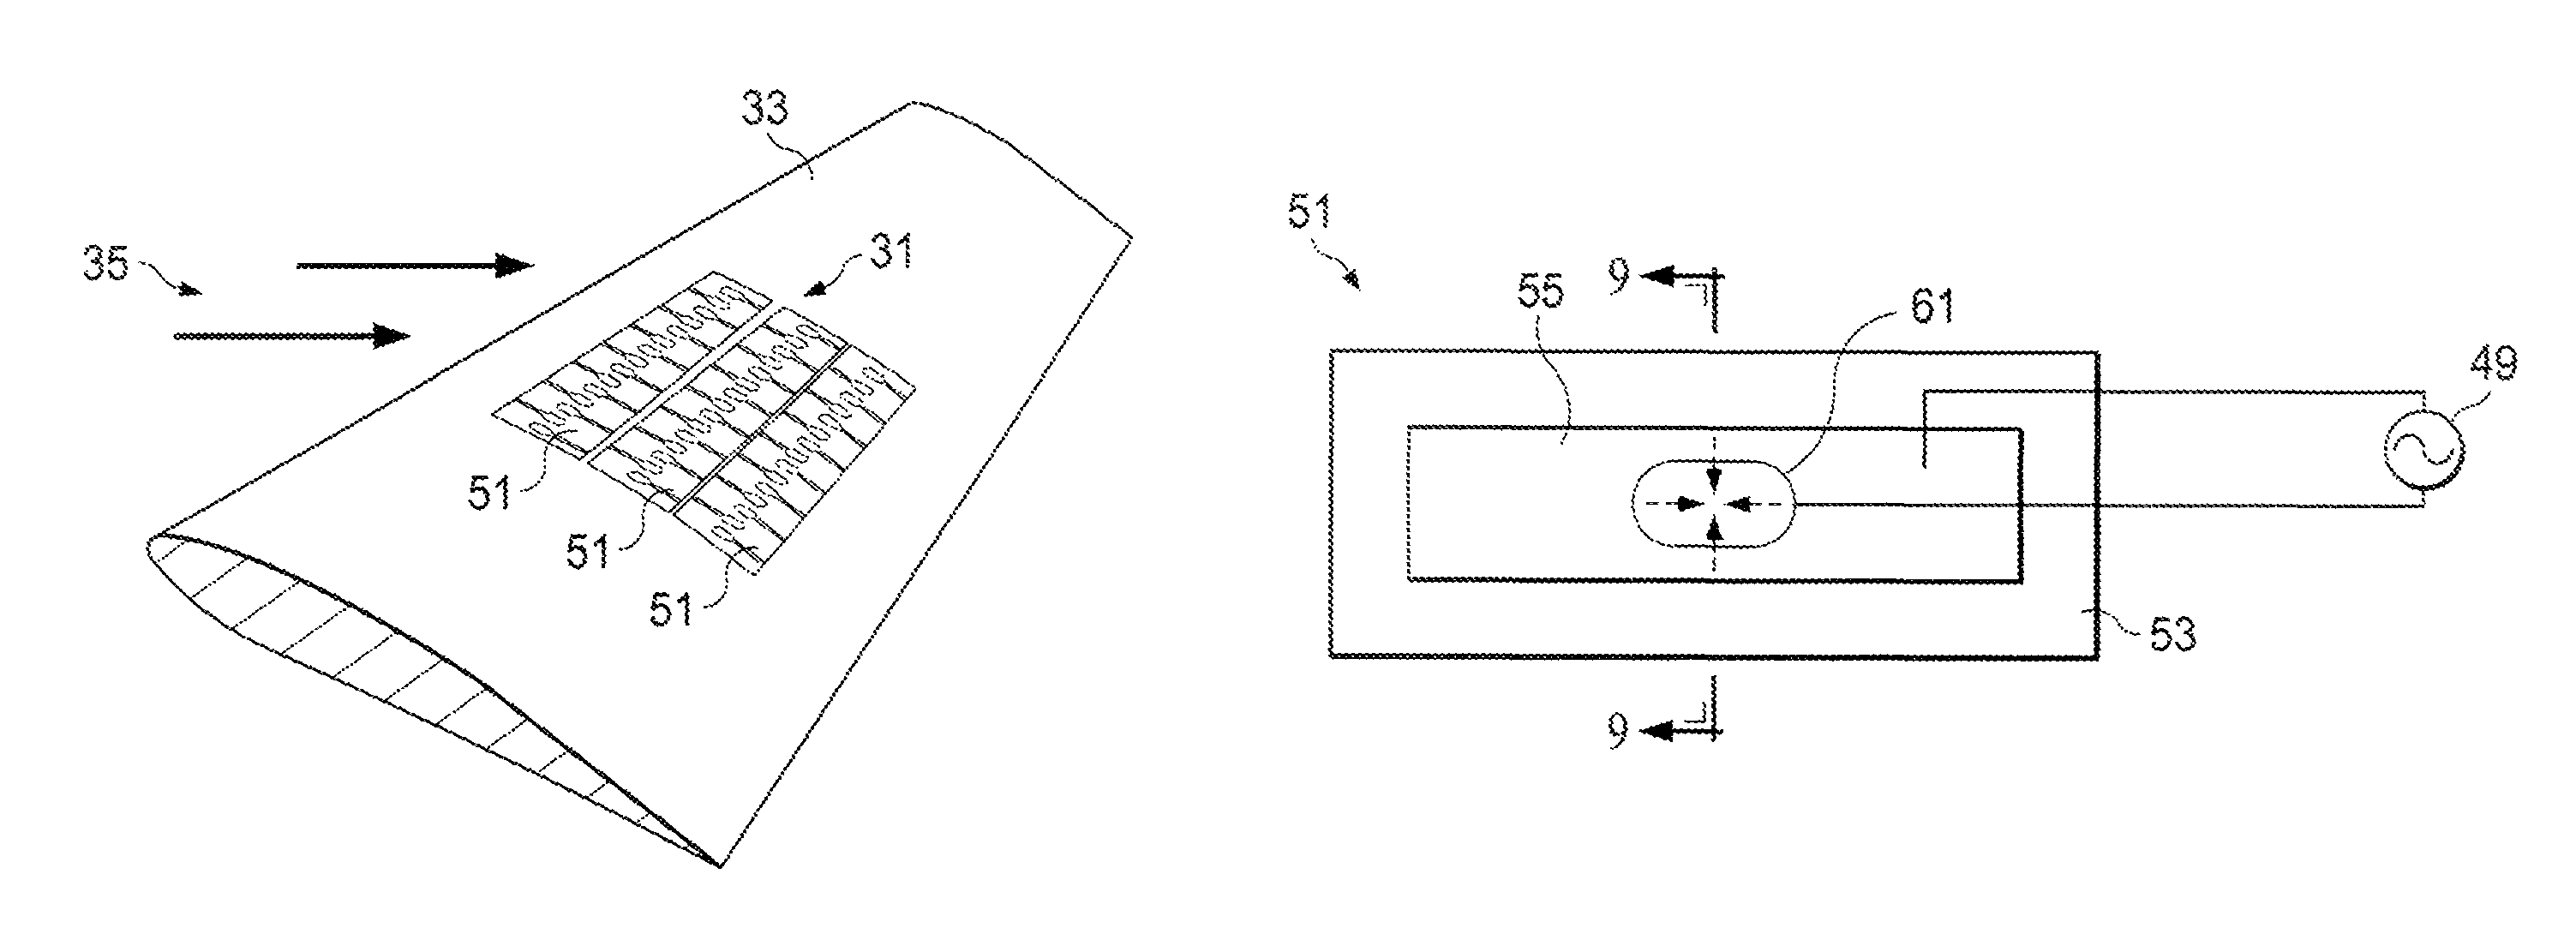 System, apparatus, program product, and related methods for providing boundary layer flow control